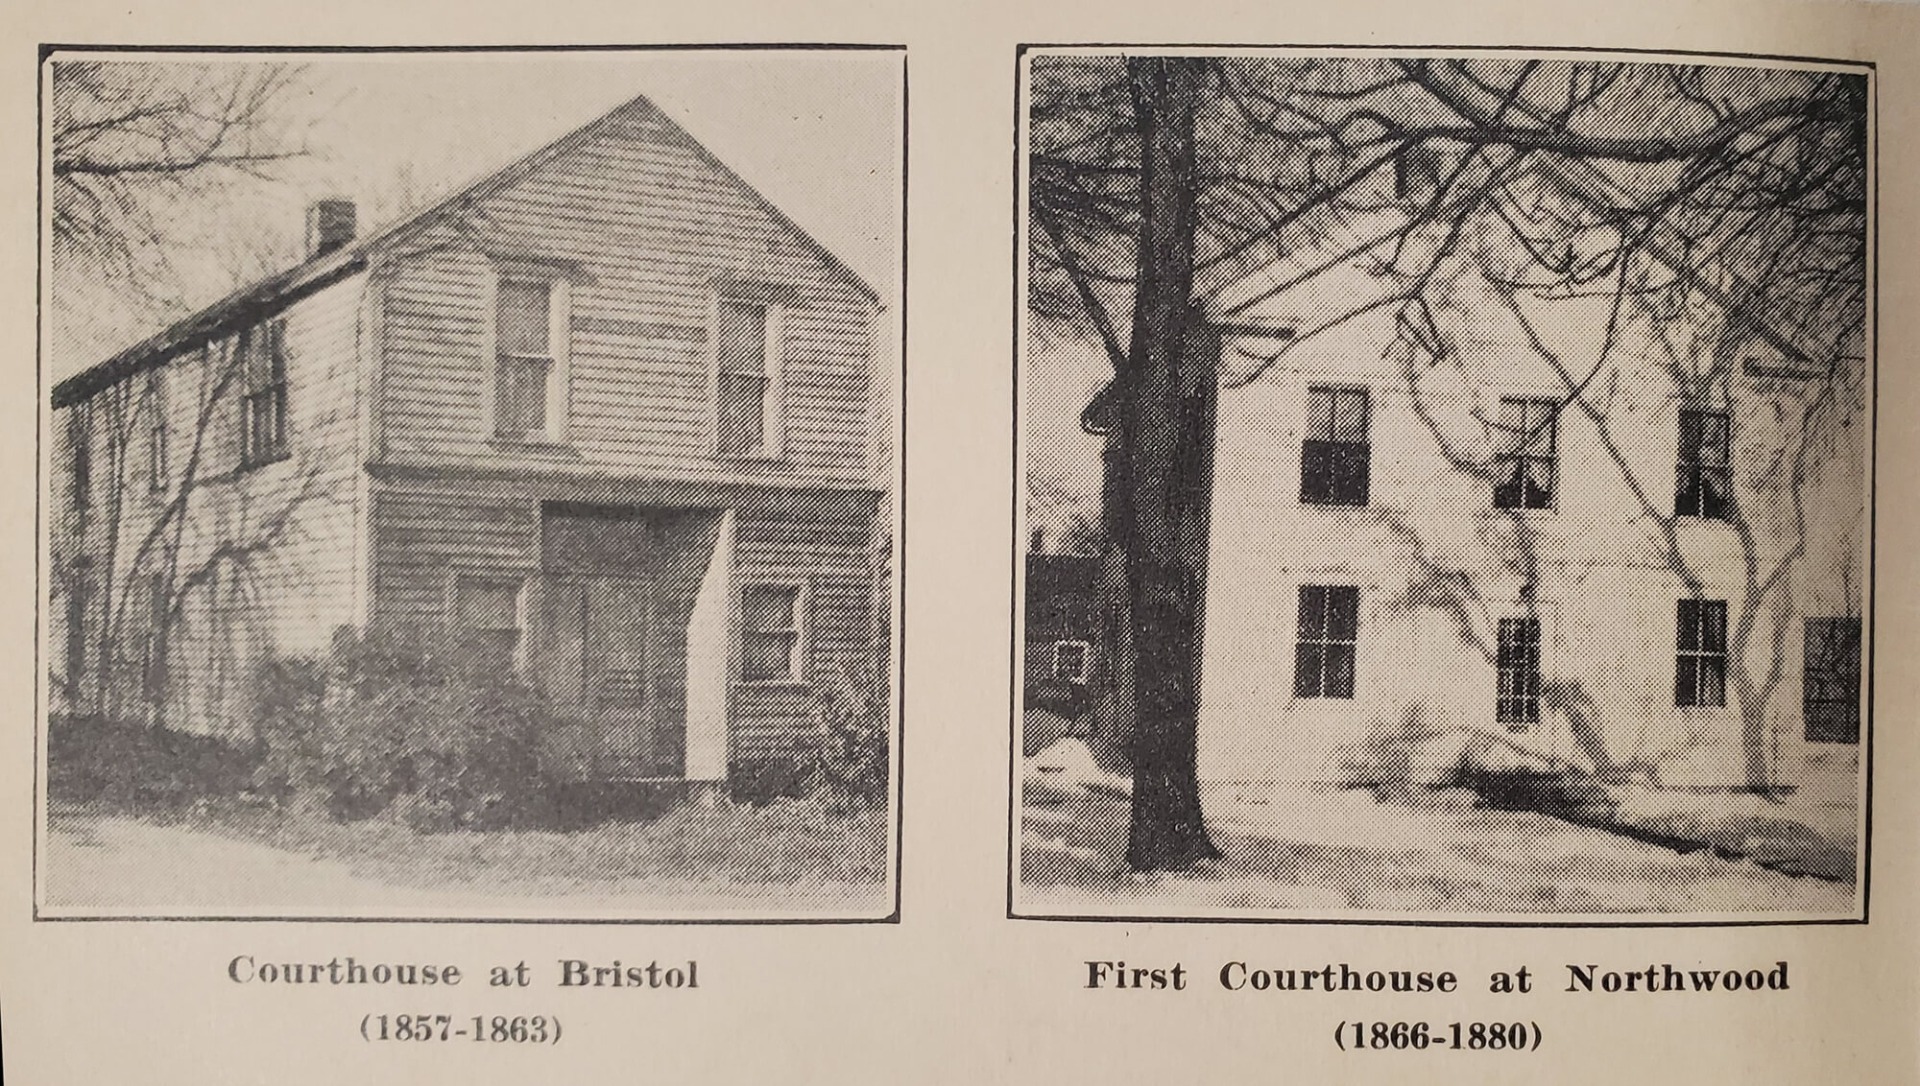 Courthouse at Bristol (1857-1863) and first courthouse at Northwood (1866-1880)